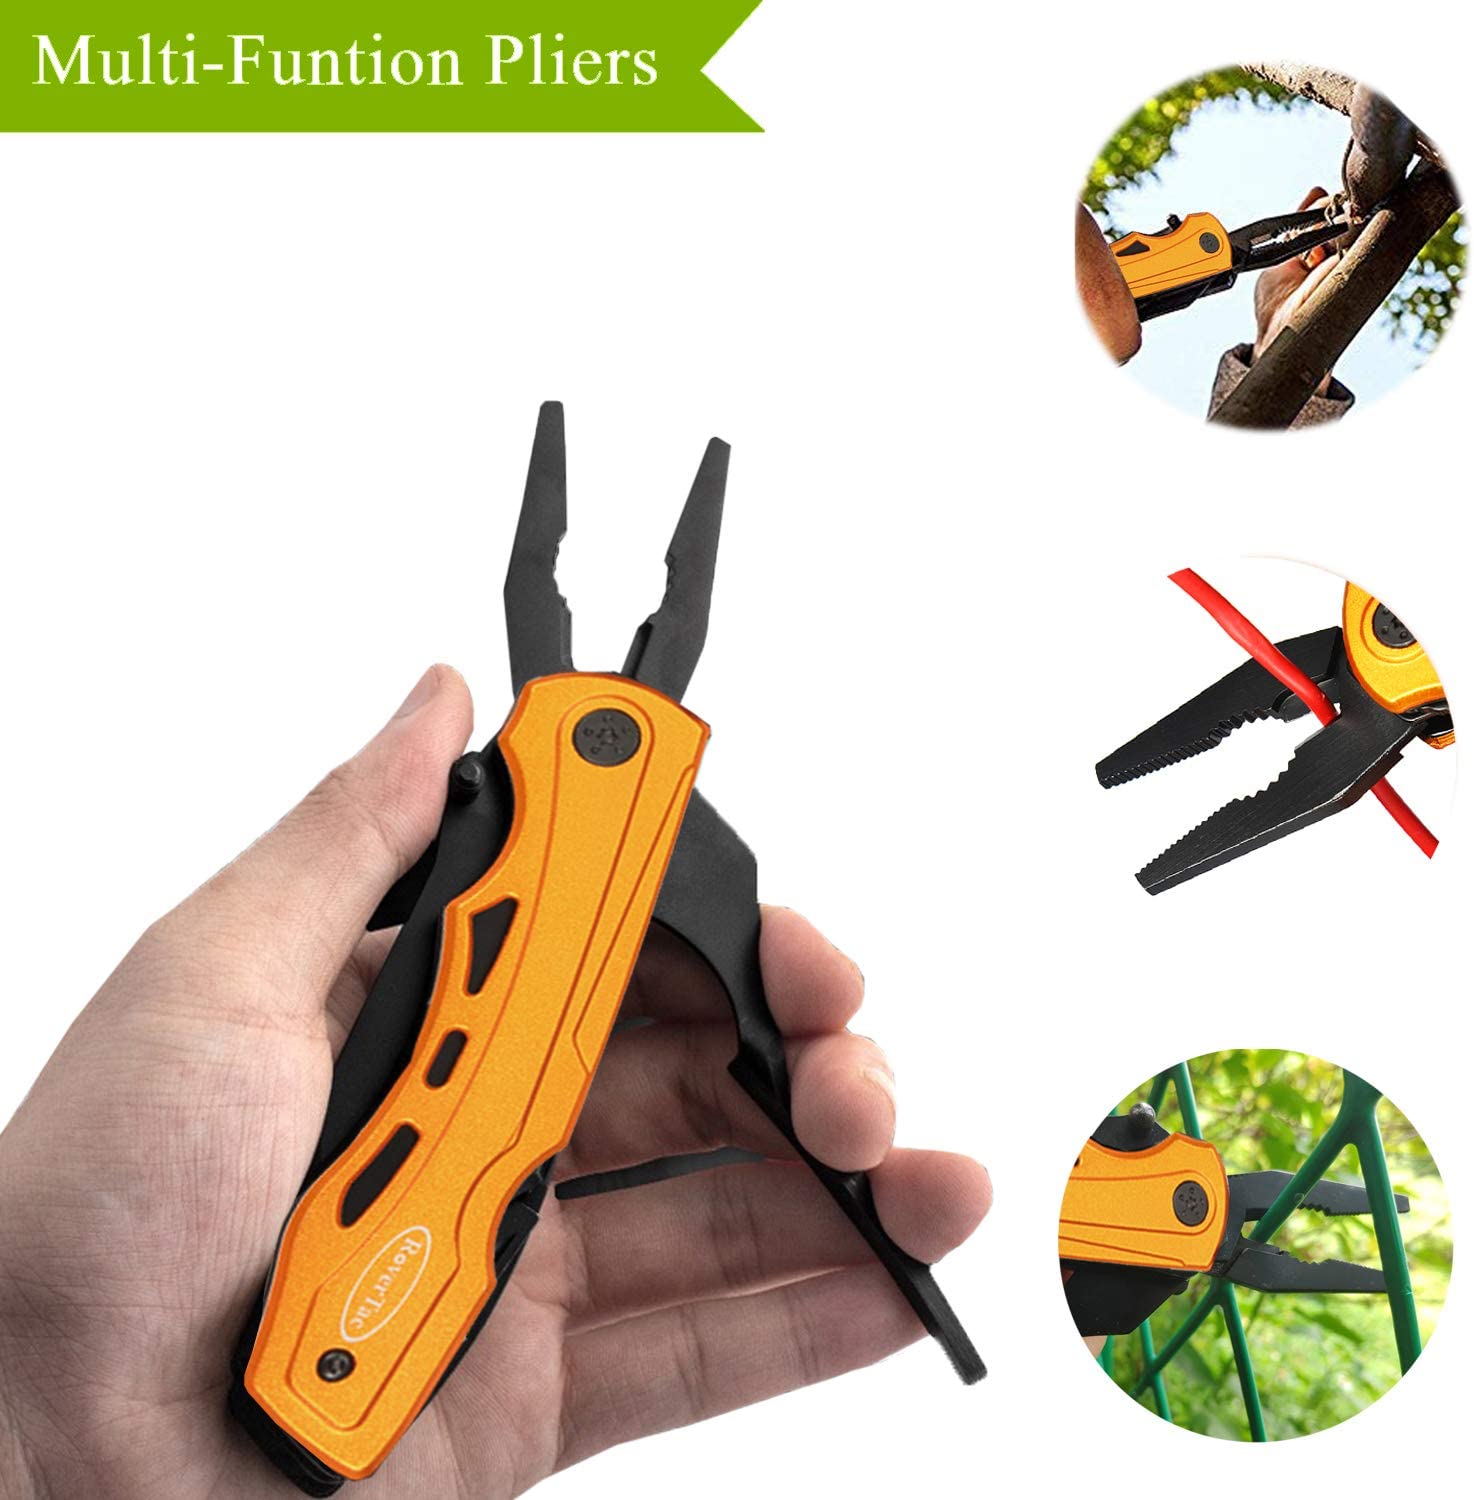 RoverTac Multitool Pocket Knife for Dad's Gifts, Gifts for Dad from Daughter Son Wife, Dad's Gifts for Birthday Christmas Father's Day, Stocking Stuffers for Dad, Cool Tools Gadgets Gifts for Dad